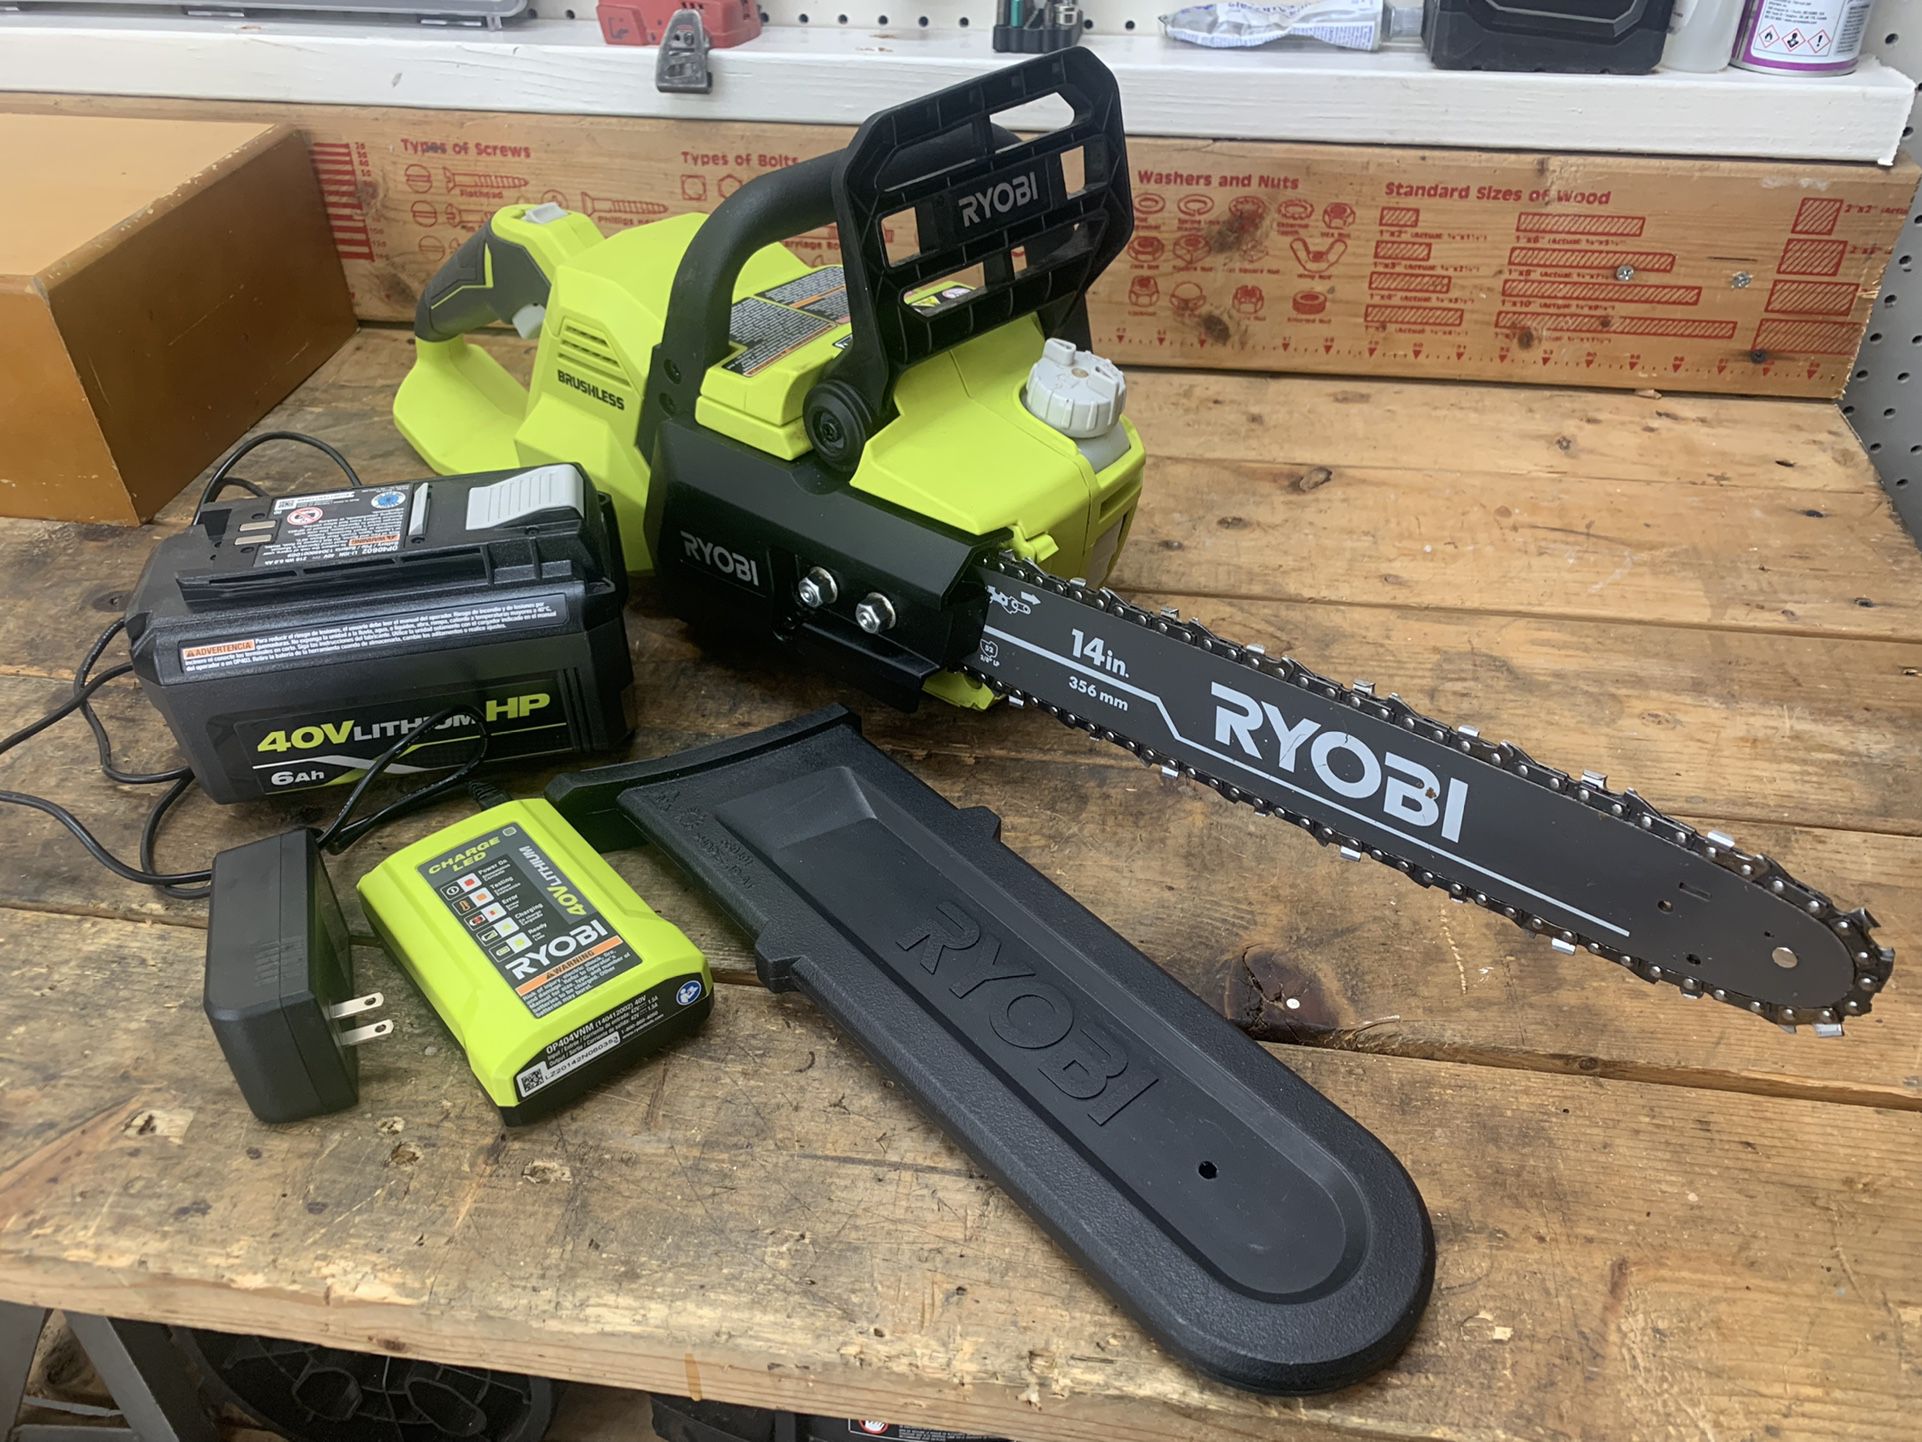 Ryobi 40V Brushless 14in. Chainsaw Kit. 6.0ah Battery and Charger Included